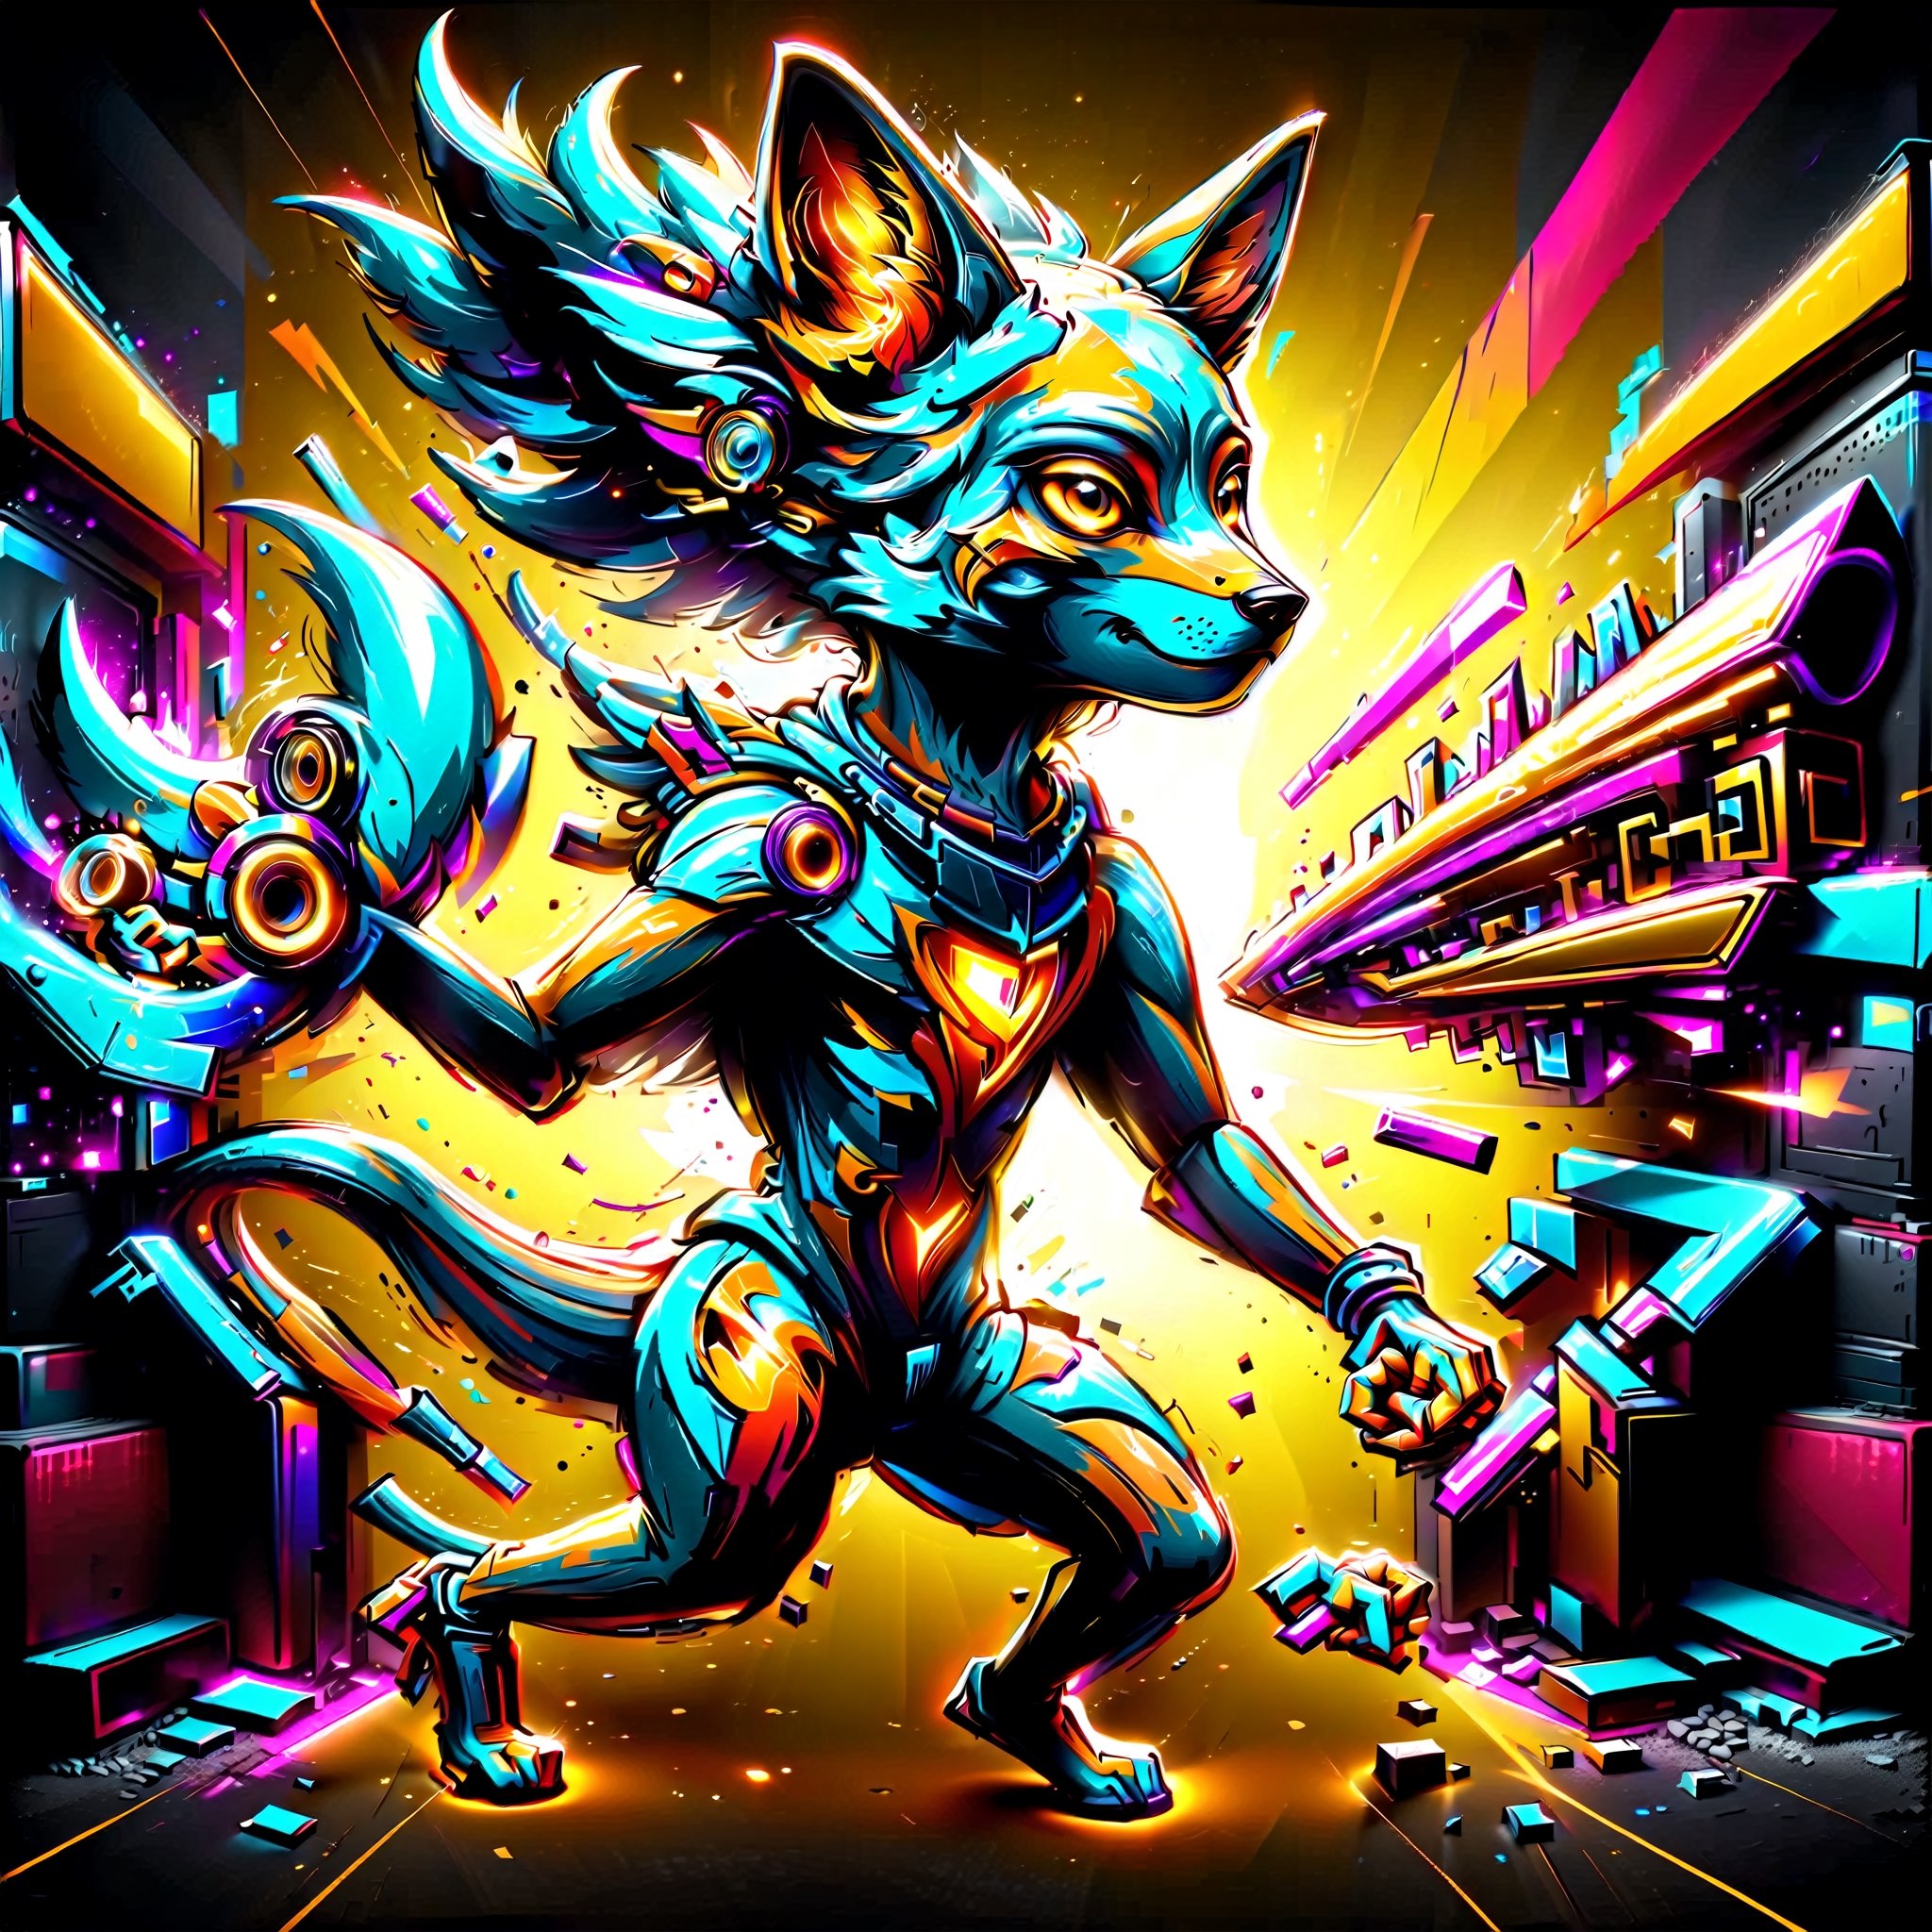 highly detailed colourful graffiti illustration of jackal playing with TNT, wearing gold headphones,